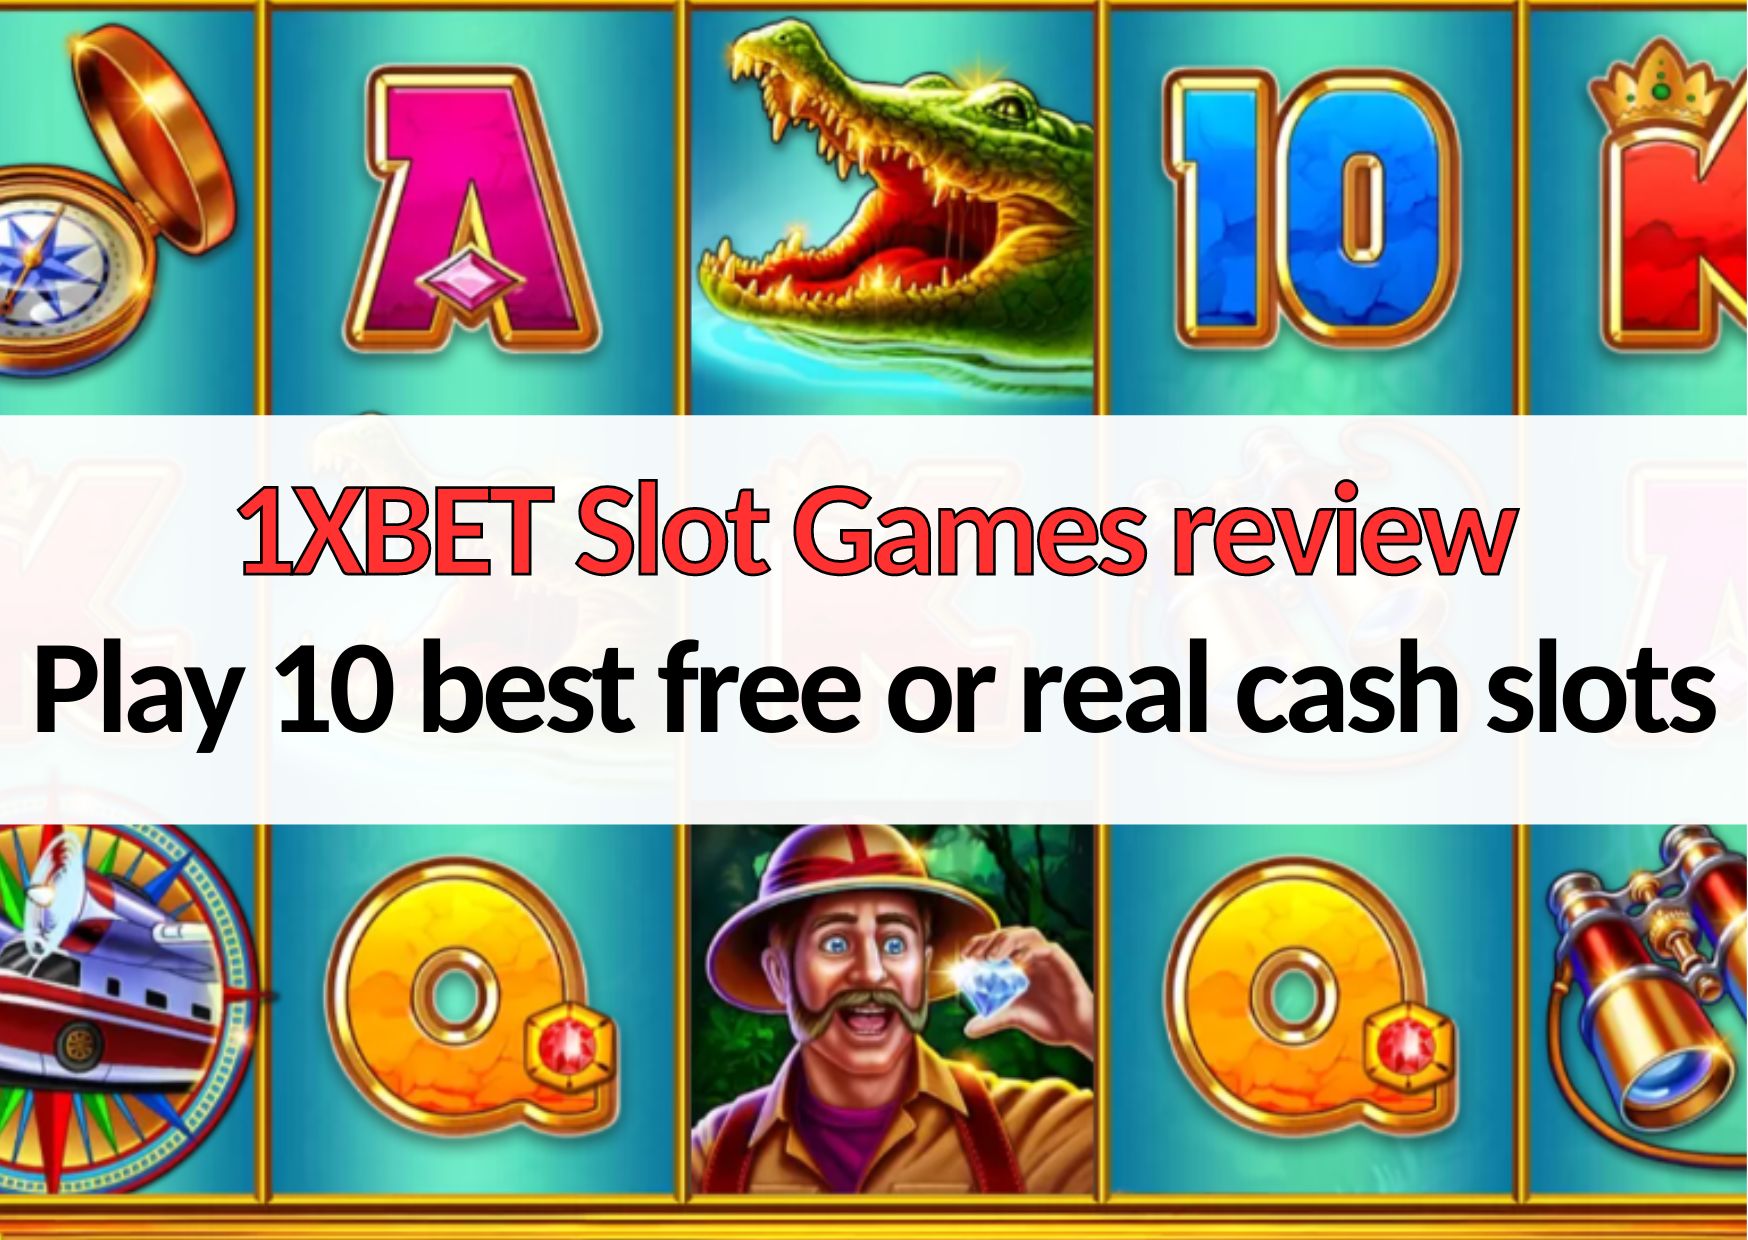 88malay 1xbet slot games review play 10 best free or real cash slots